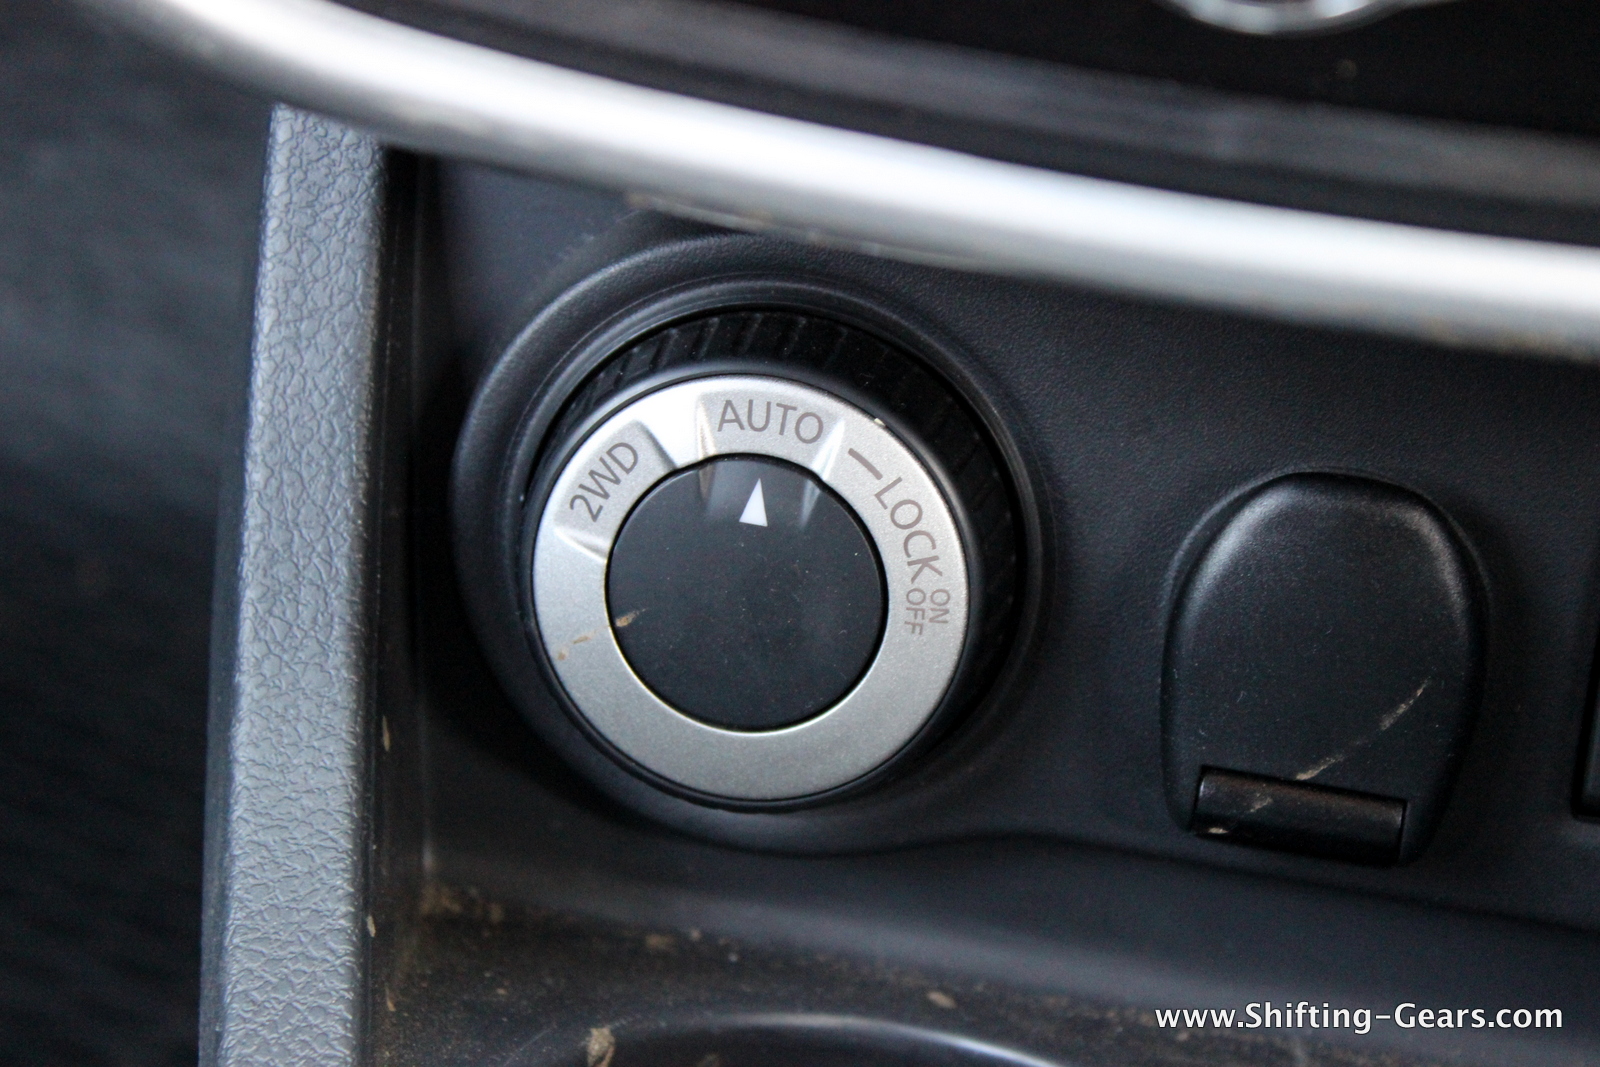 Shift-on-fly lever is placed under the AC controls